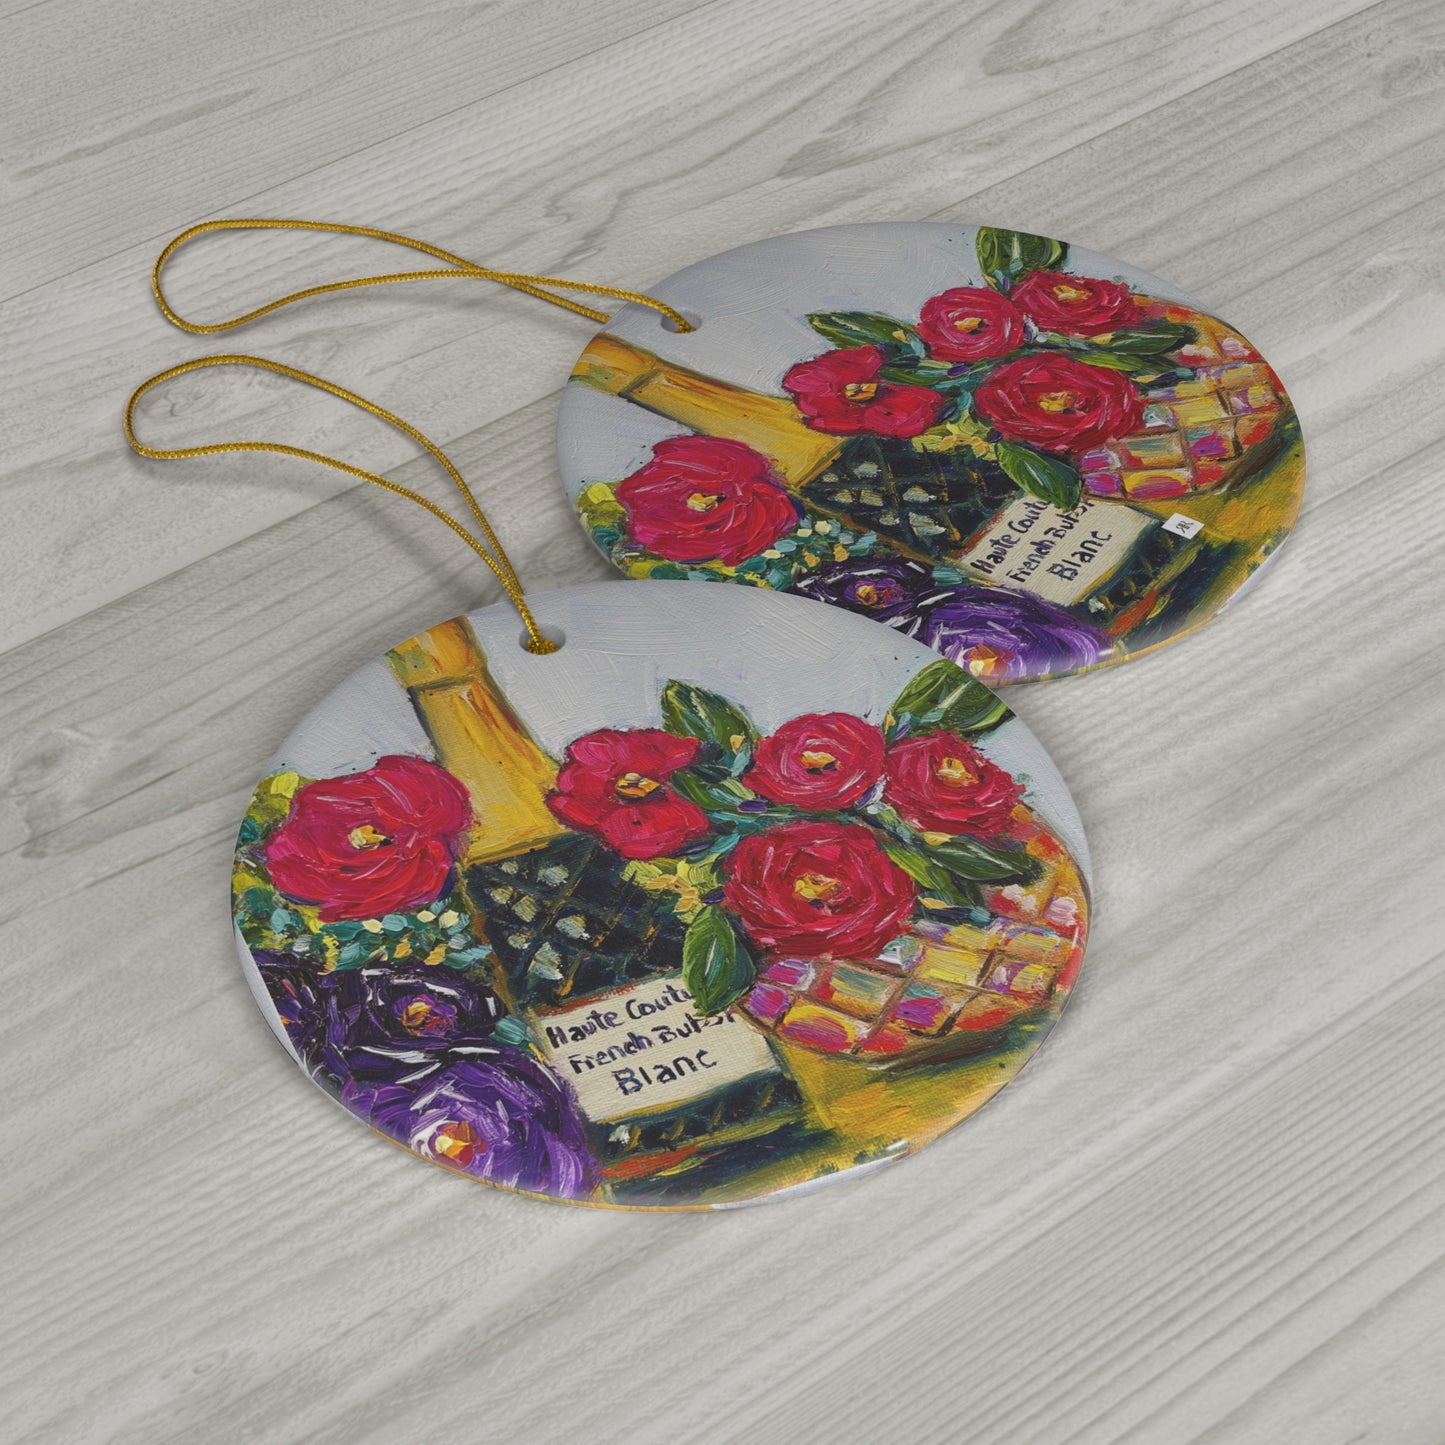 French Bubbles Champagne and Roses Ceramic Ornament